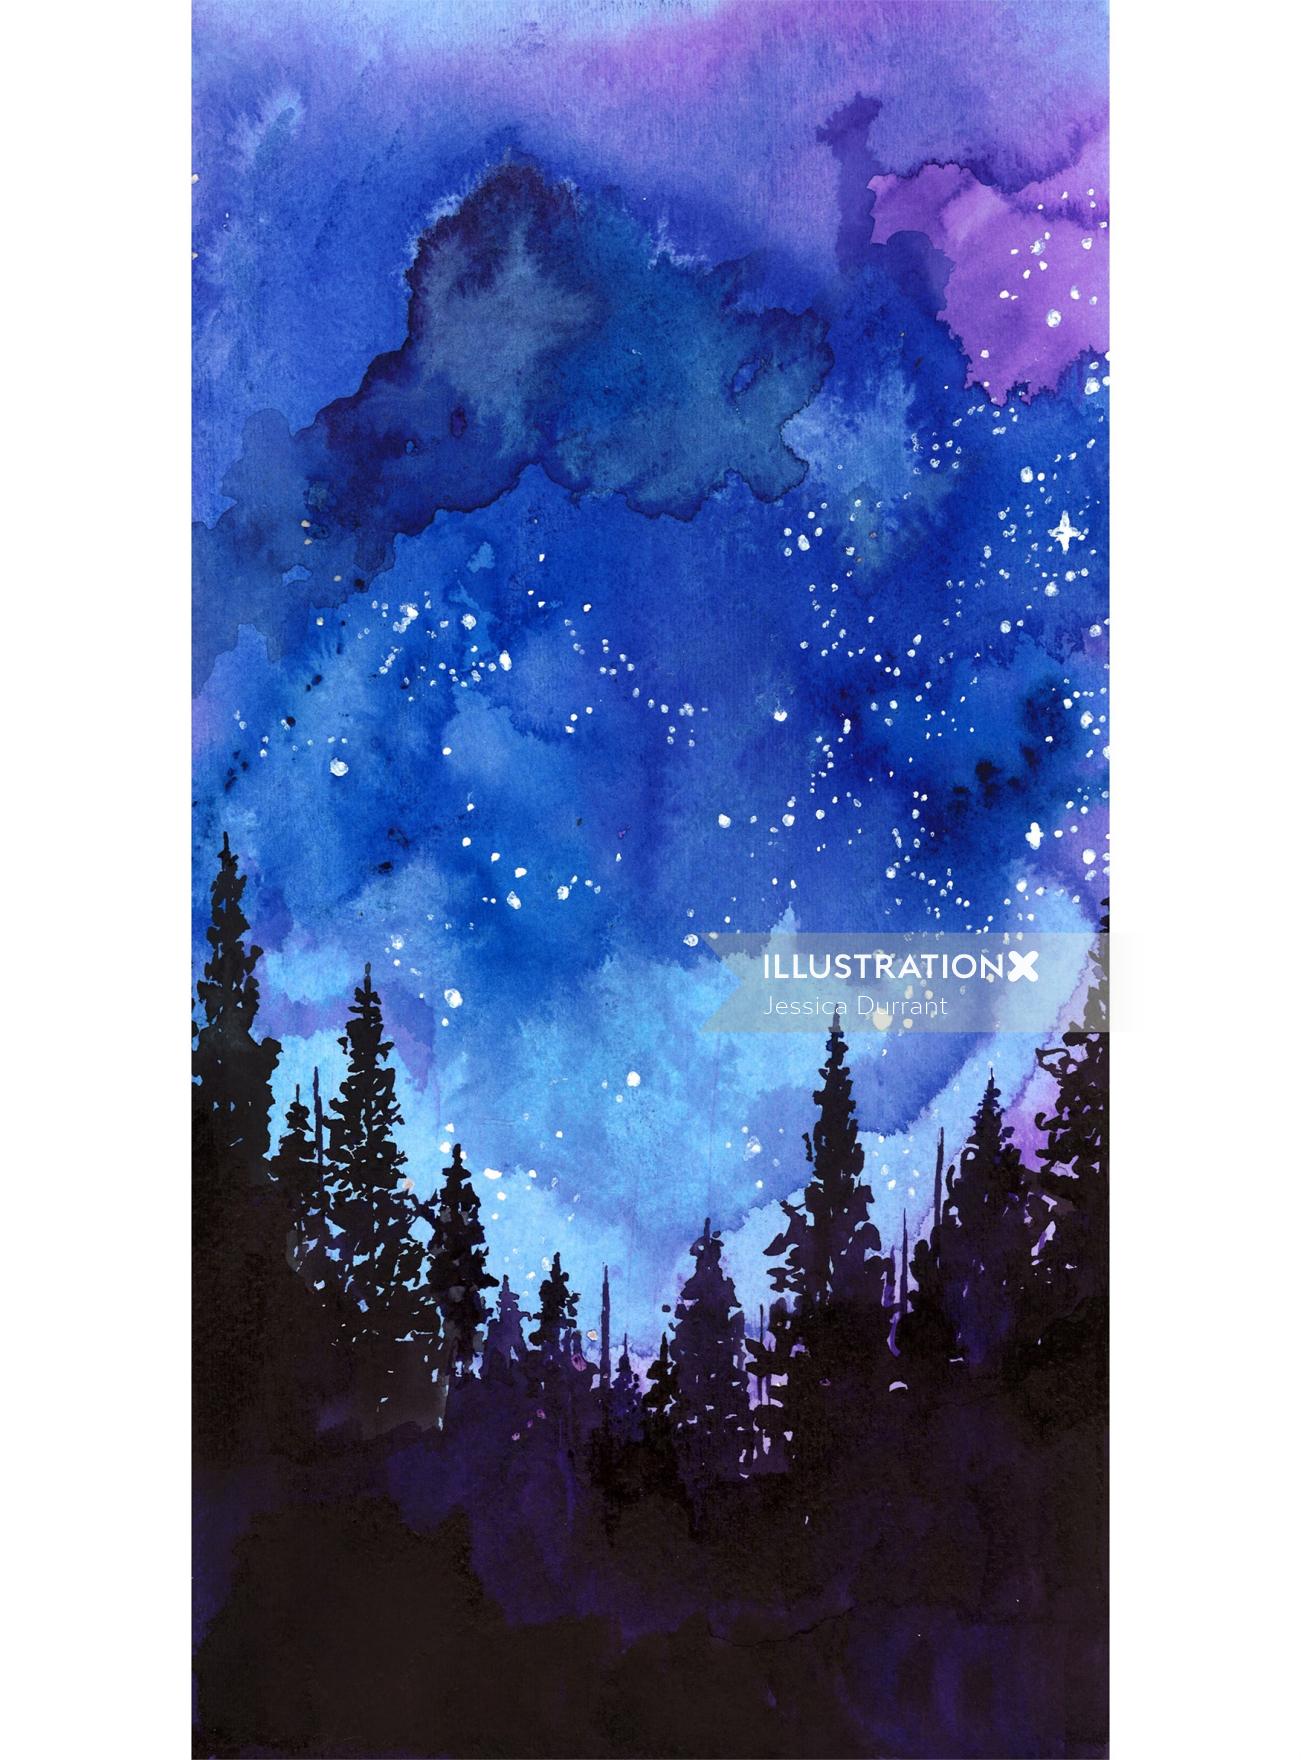 Let's Go See the Stars mixed media illustration